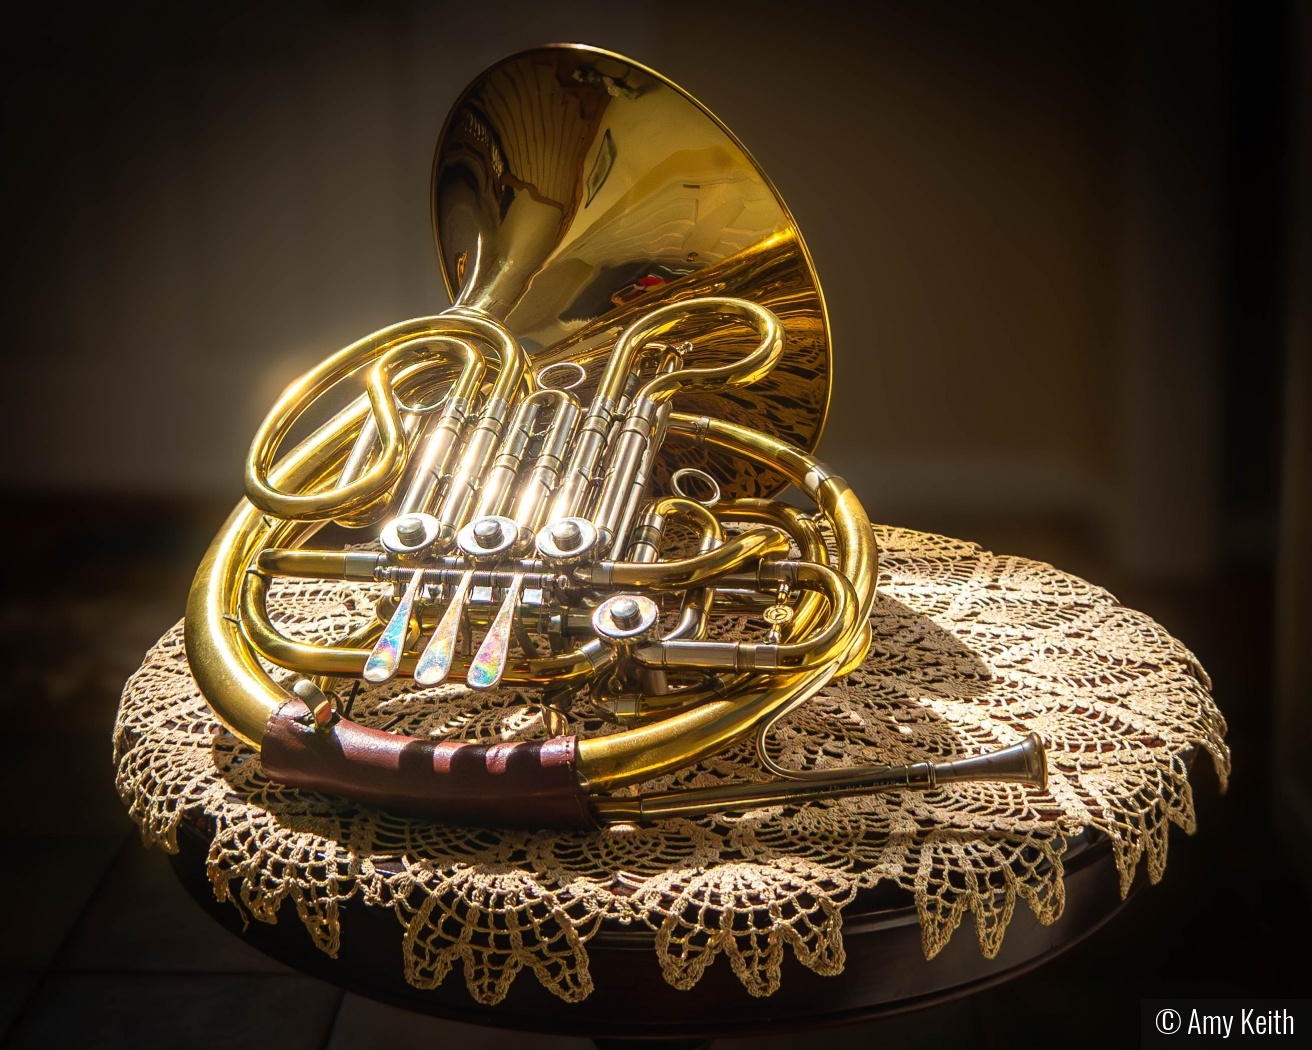 French Horn in the Golden Hour by Amy Keith